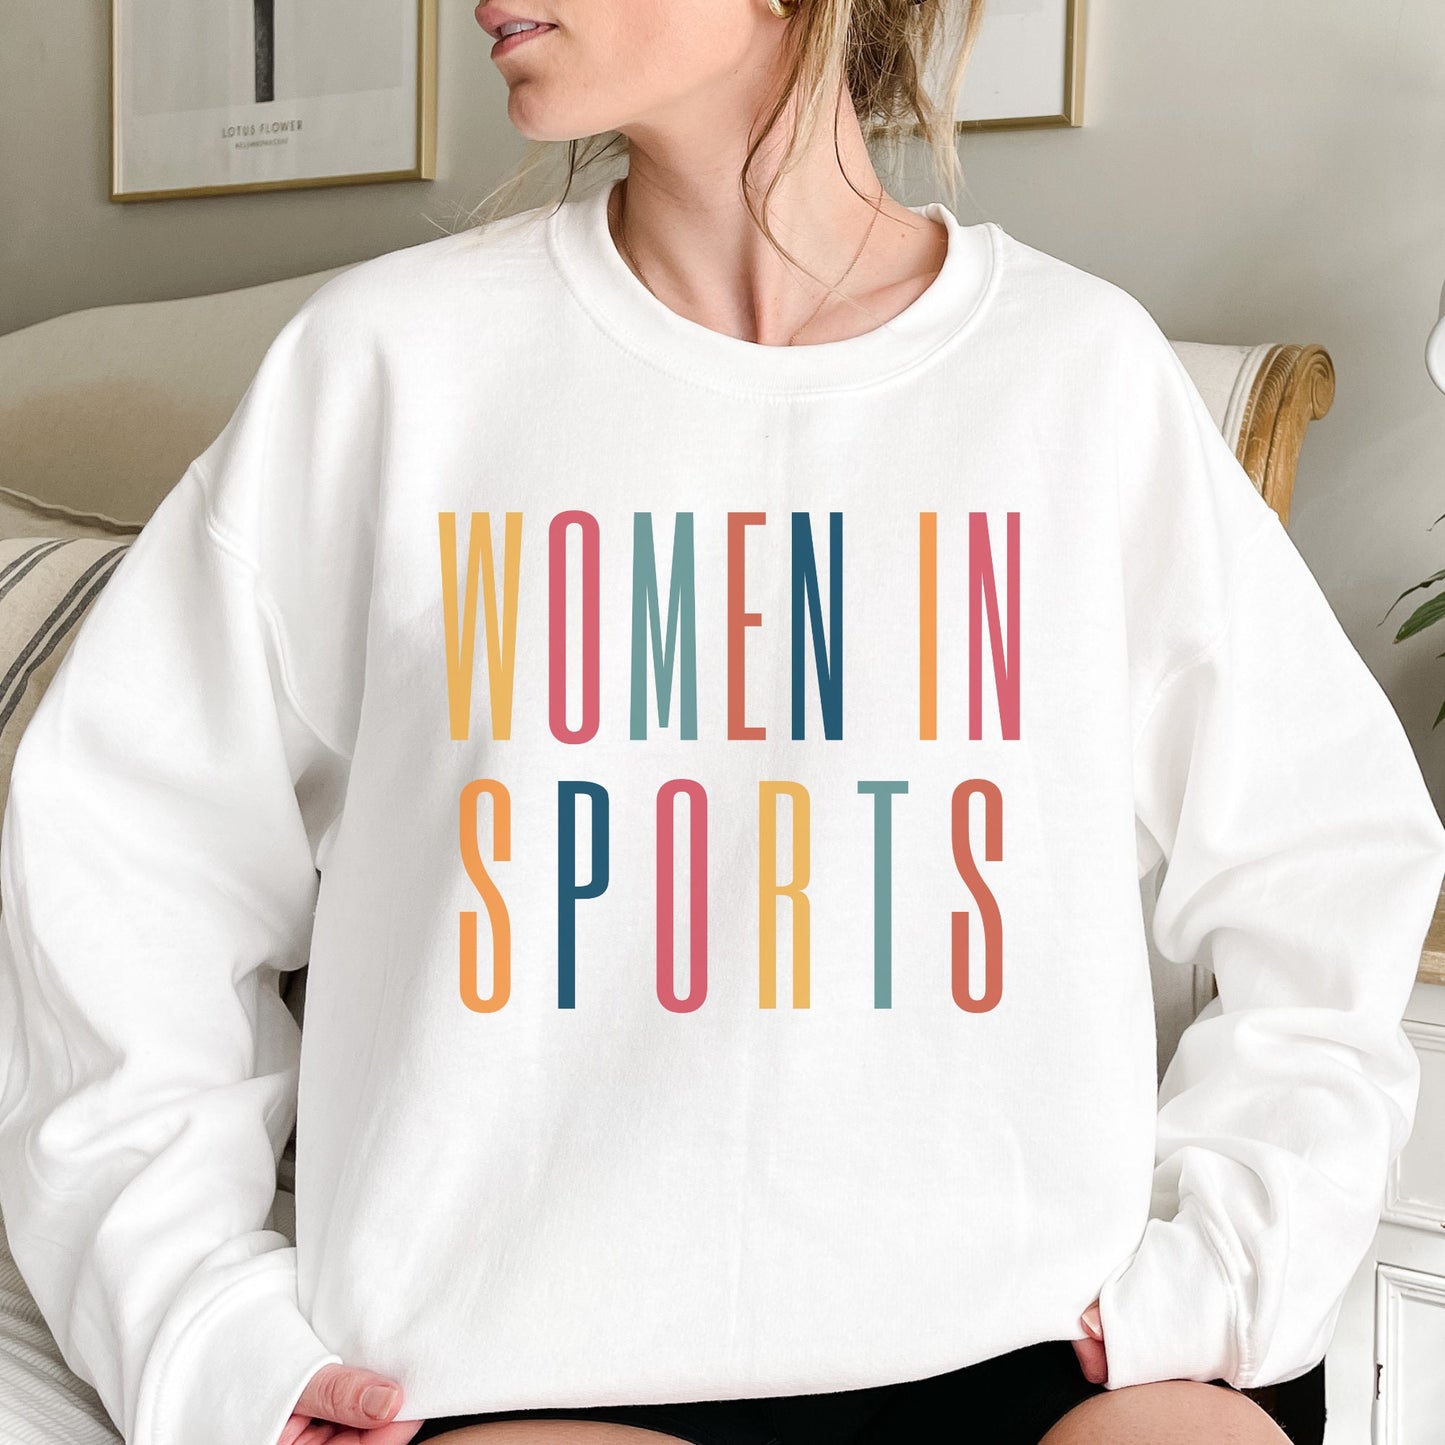 white unisex sweatshirt that says women in sports in capital, multicolored letters